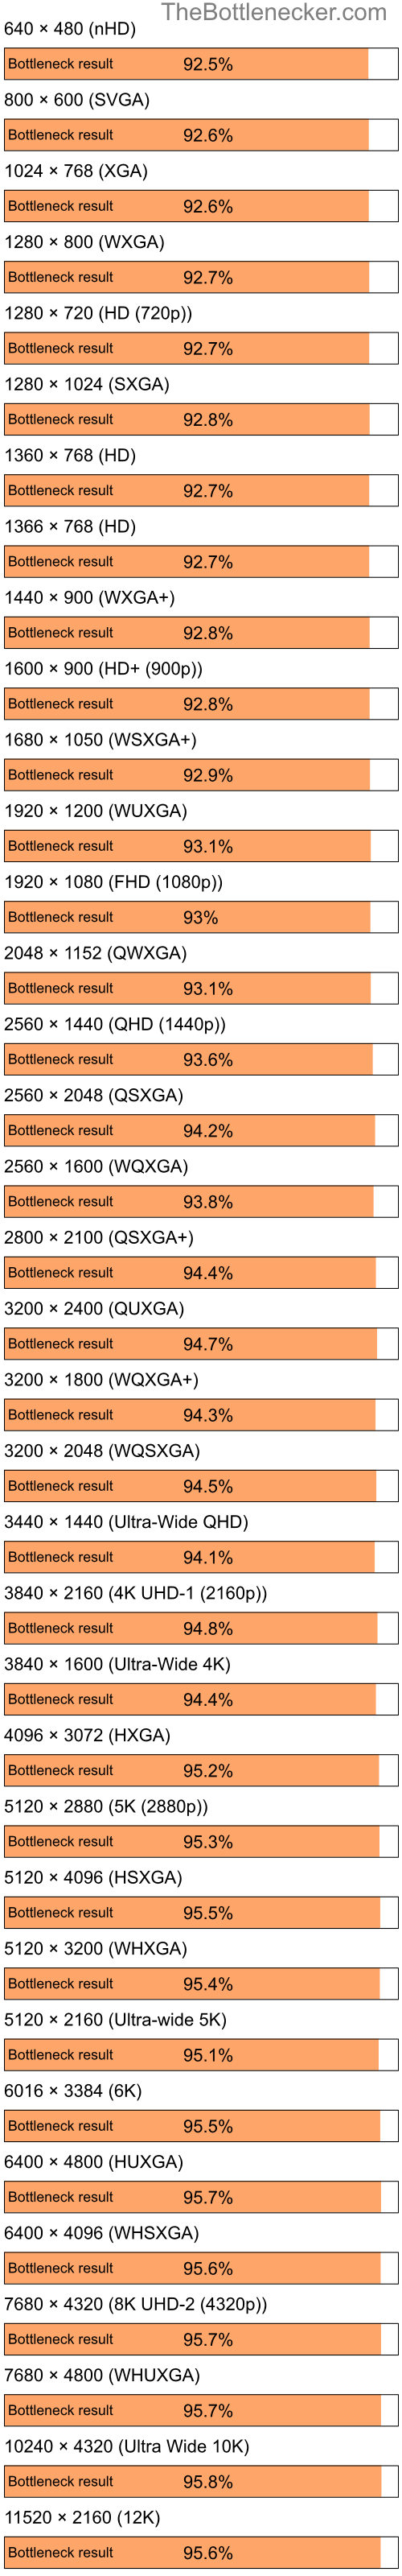 Bottleneck results by resolution for Intel Celeron and AMD Radeon 9200 PRO Family in Graphic Card Intense Tasks